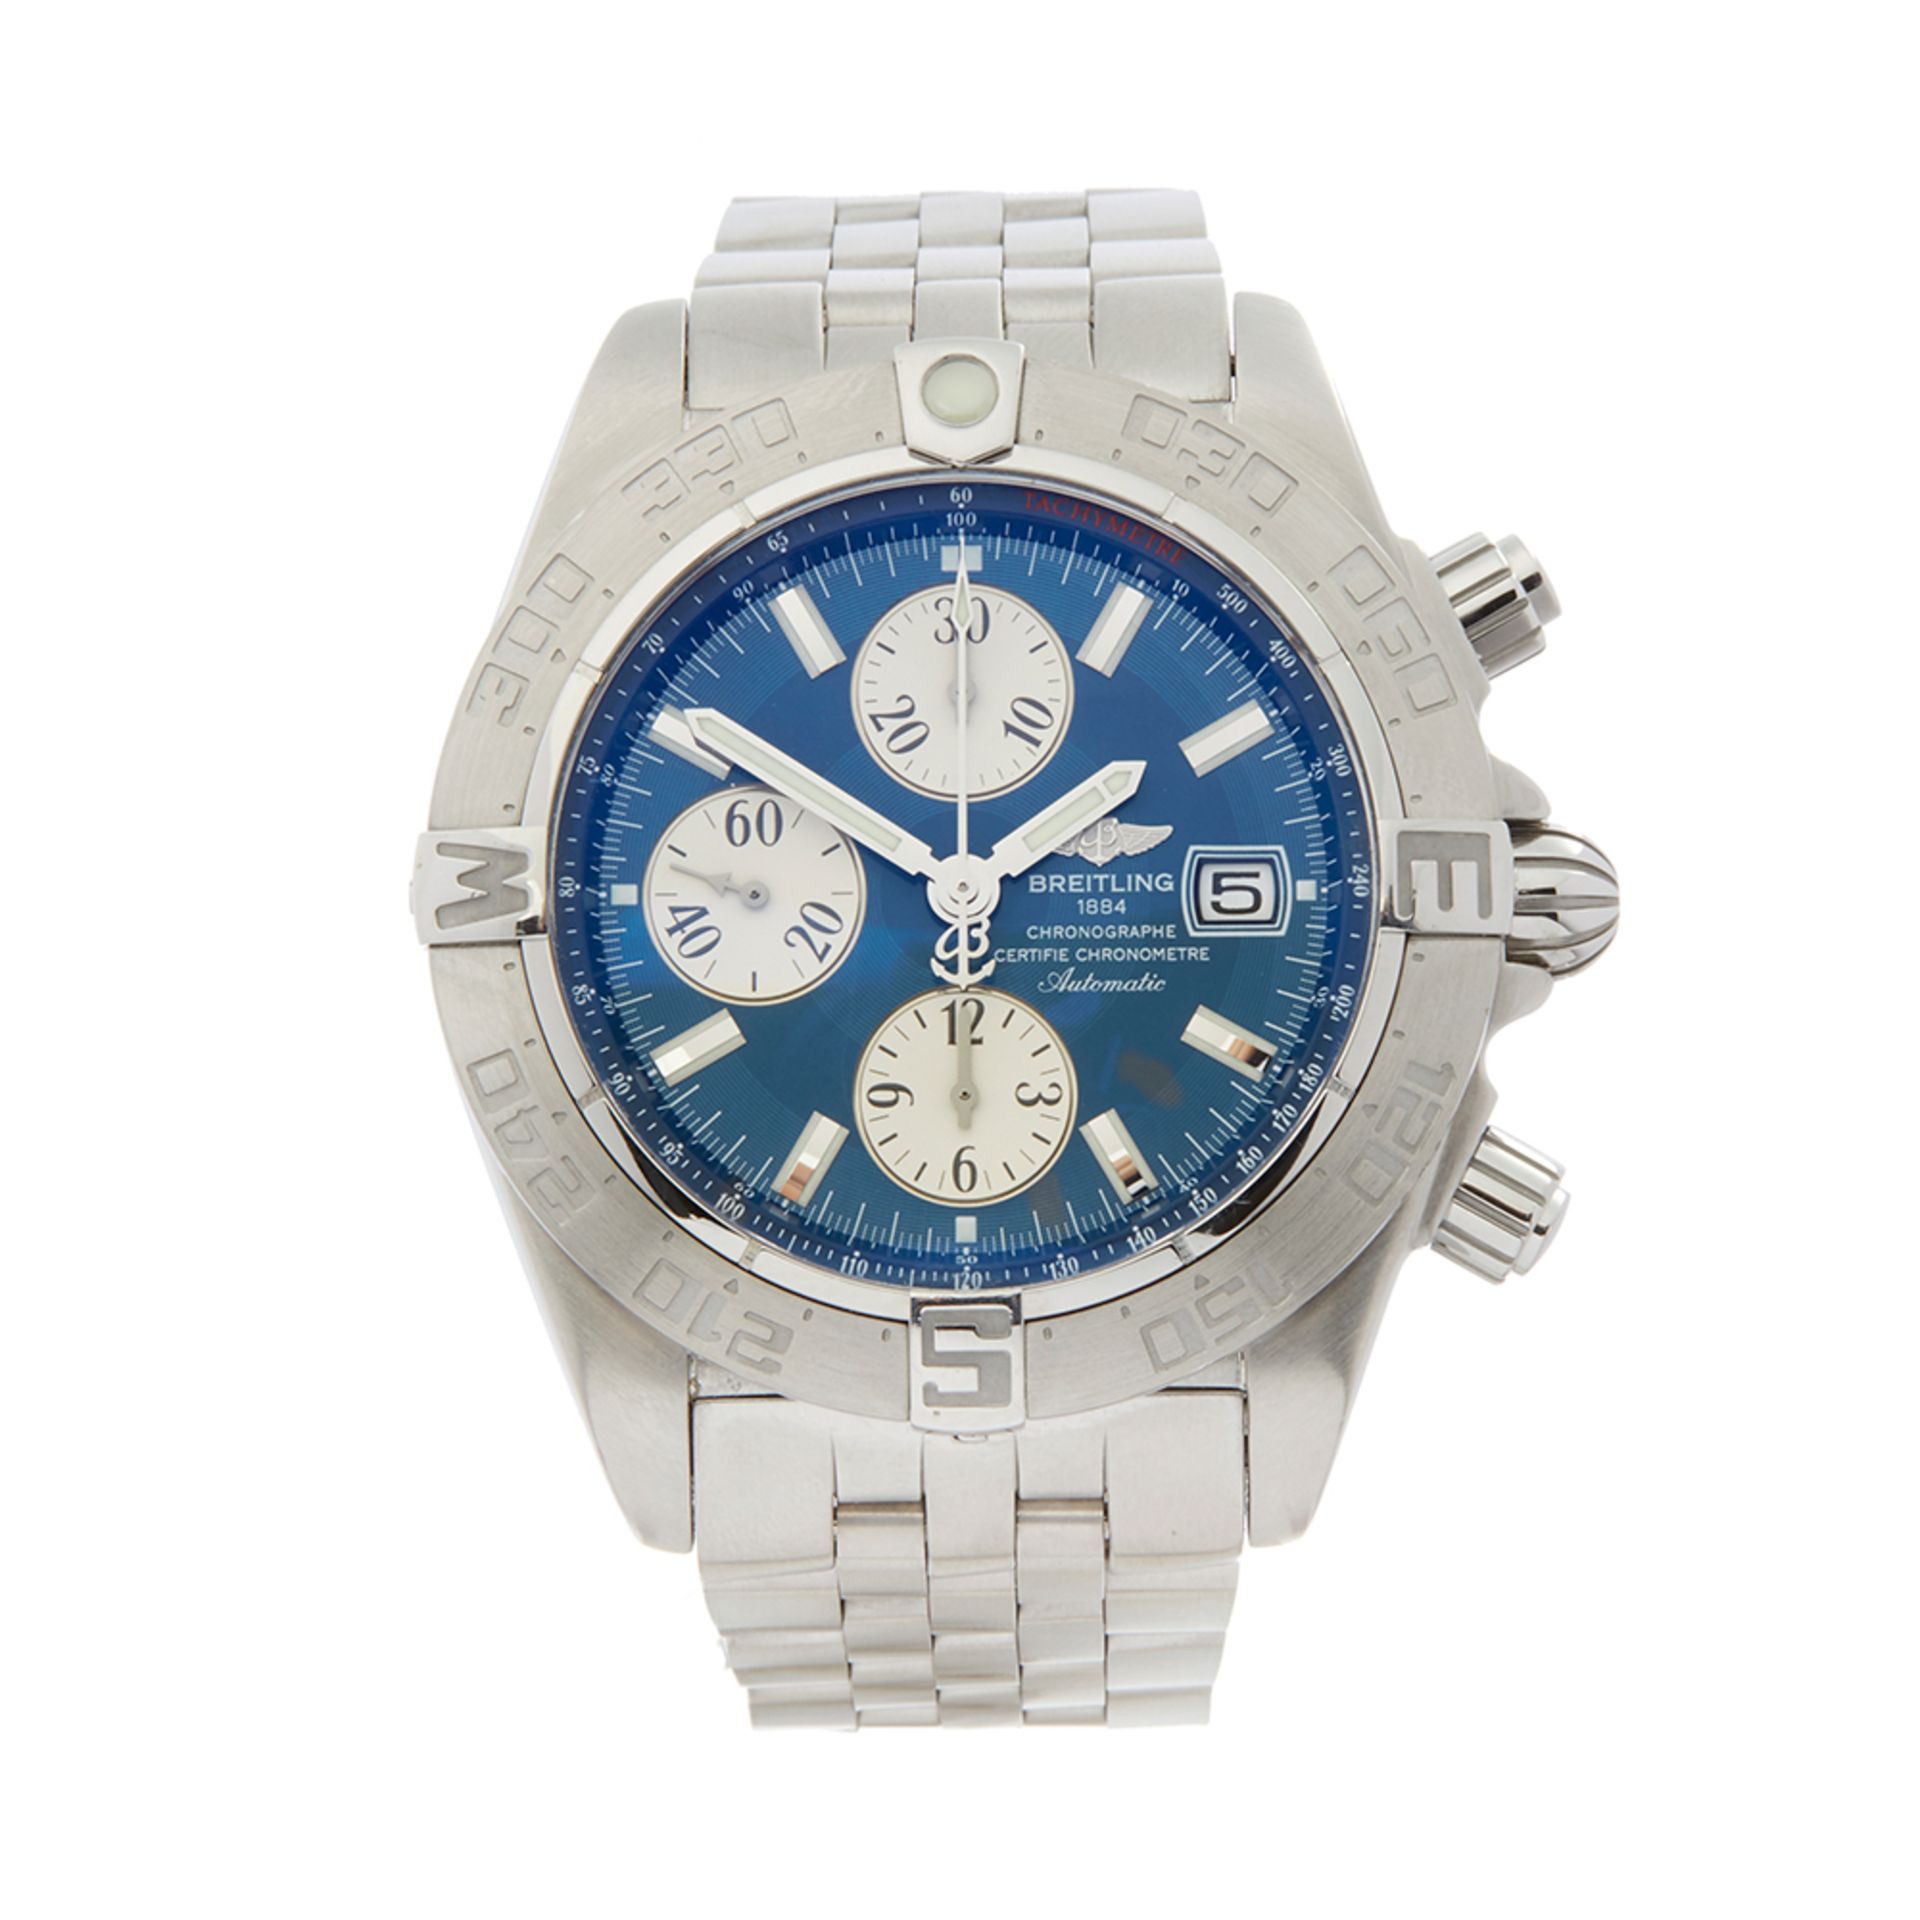 Breitling Galactic II Chronograph Stainless Steel - A1336410 - Image 2 of 8